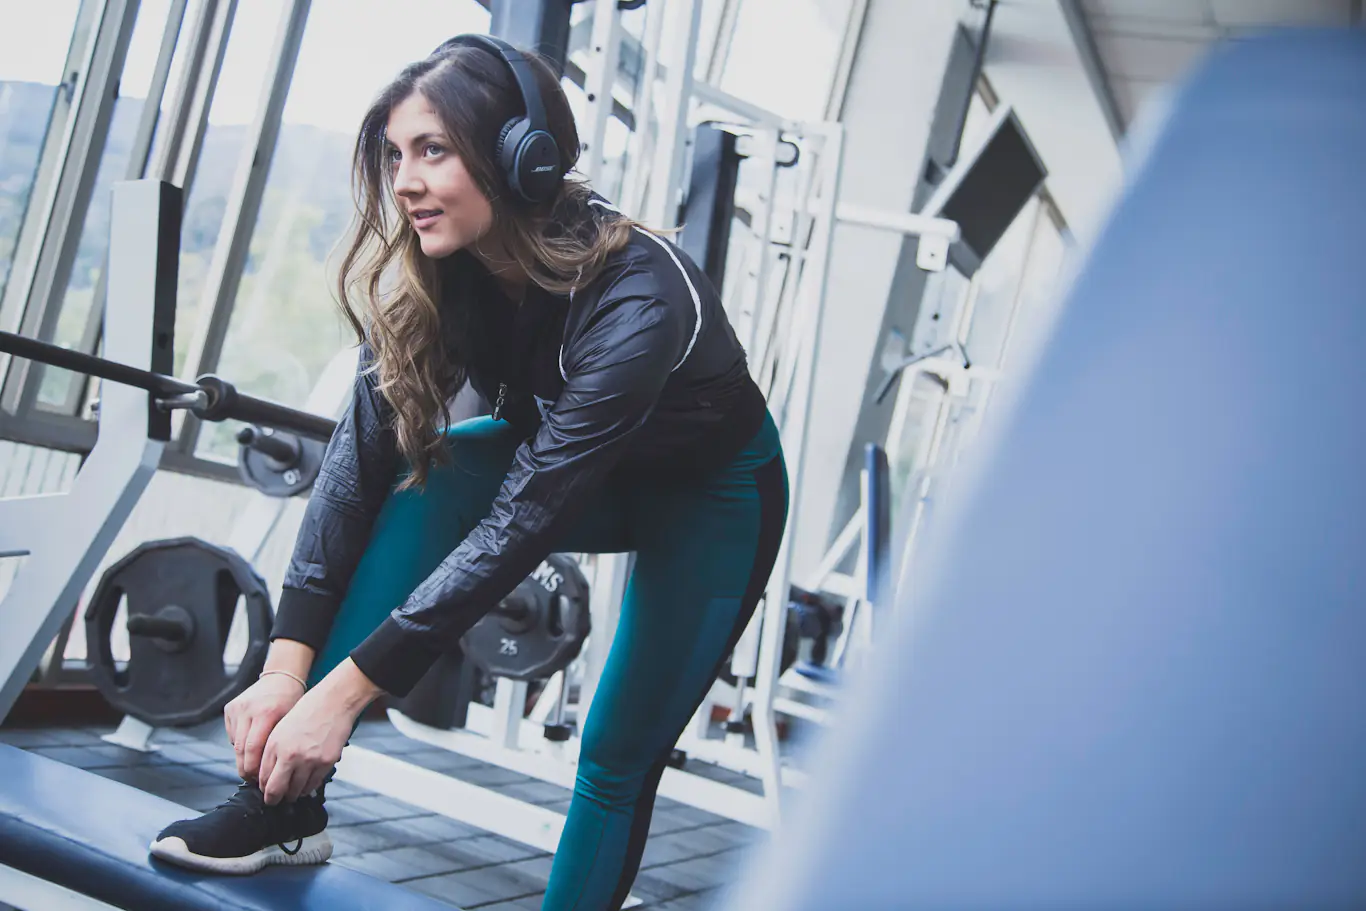 The Best Running Playlists for Different Workouts